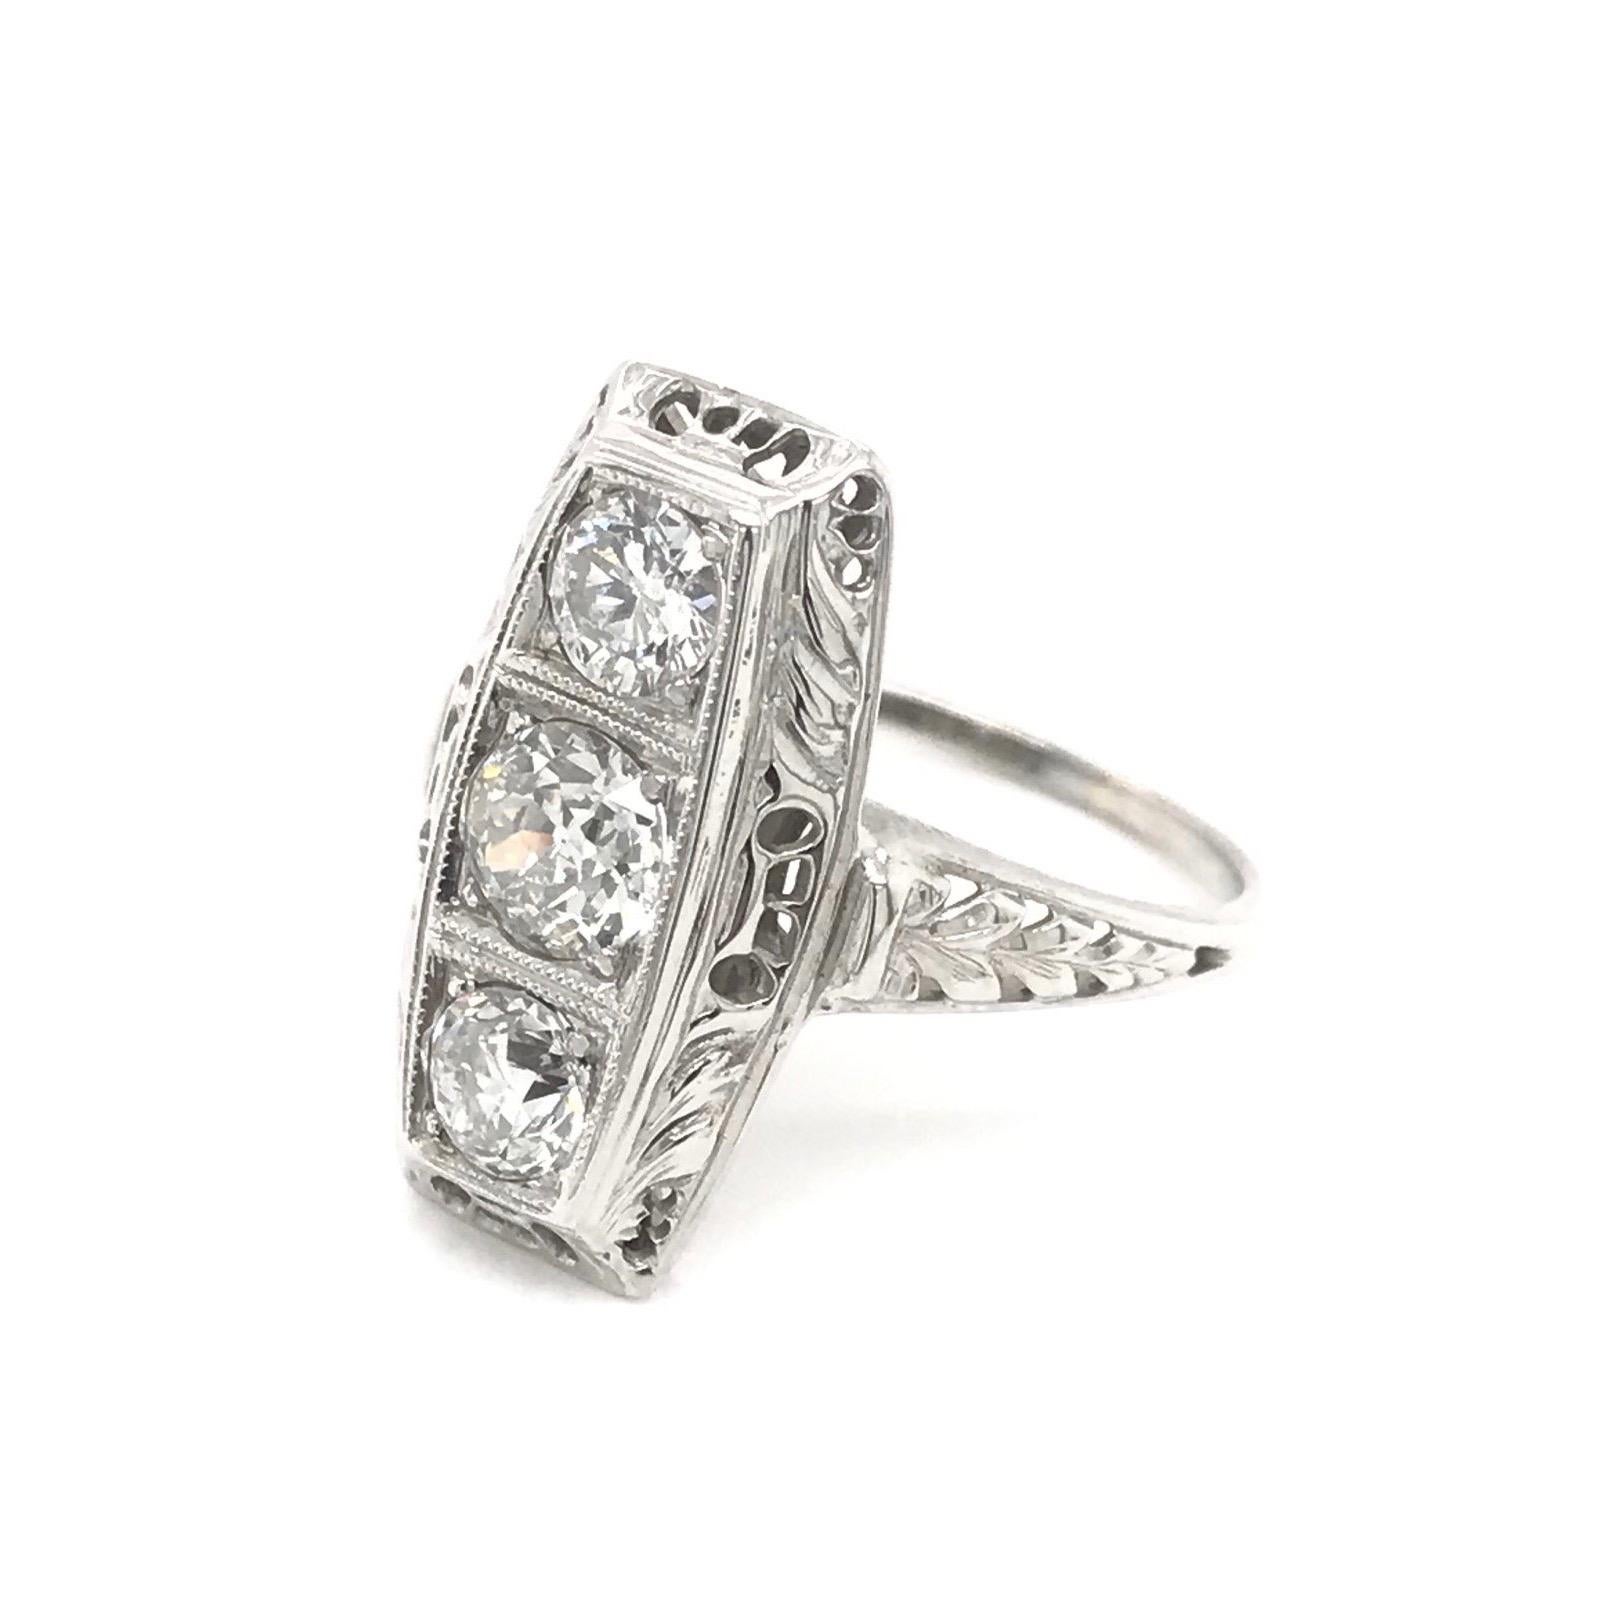 This piece was handcrafted sometime during the Art Deco design period ( 1920-1940 ). The setting is 18k white gold and features three Old European Cut diamonds set north to south. The diamonds are in the H to I color range and the combined total